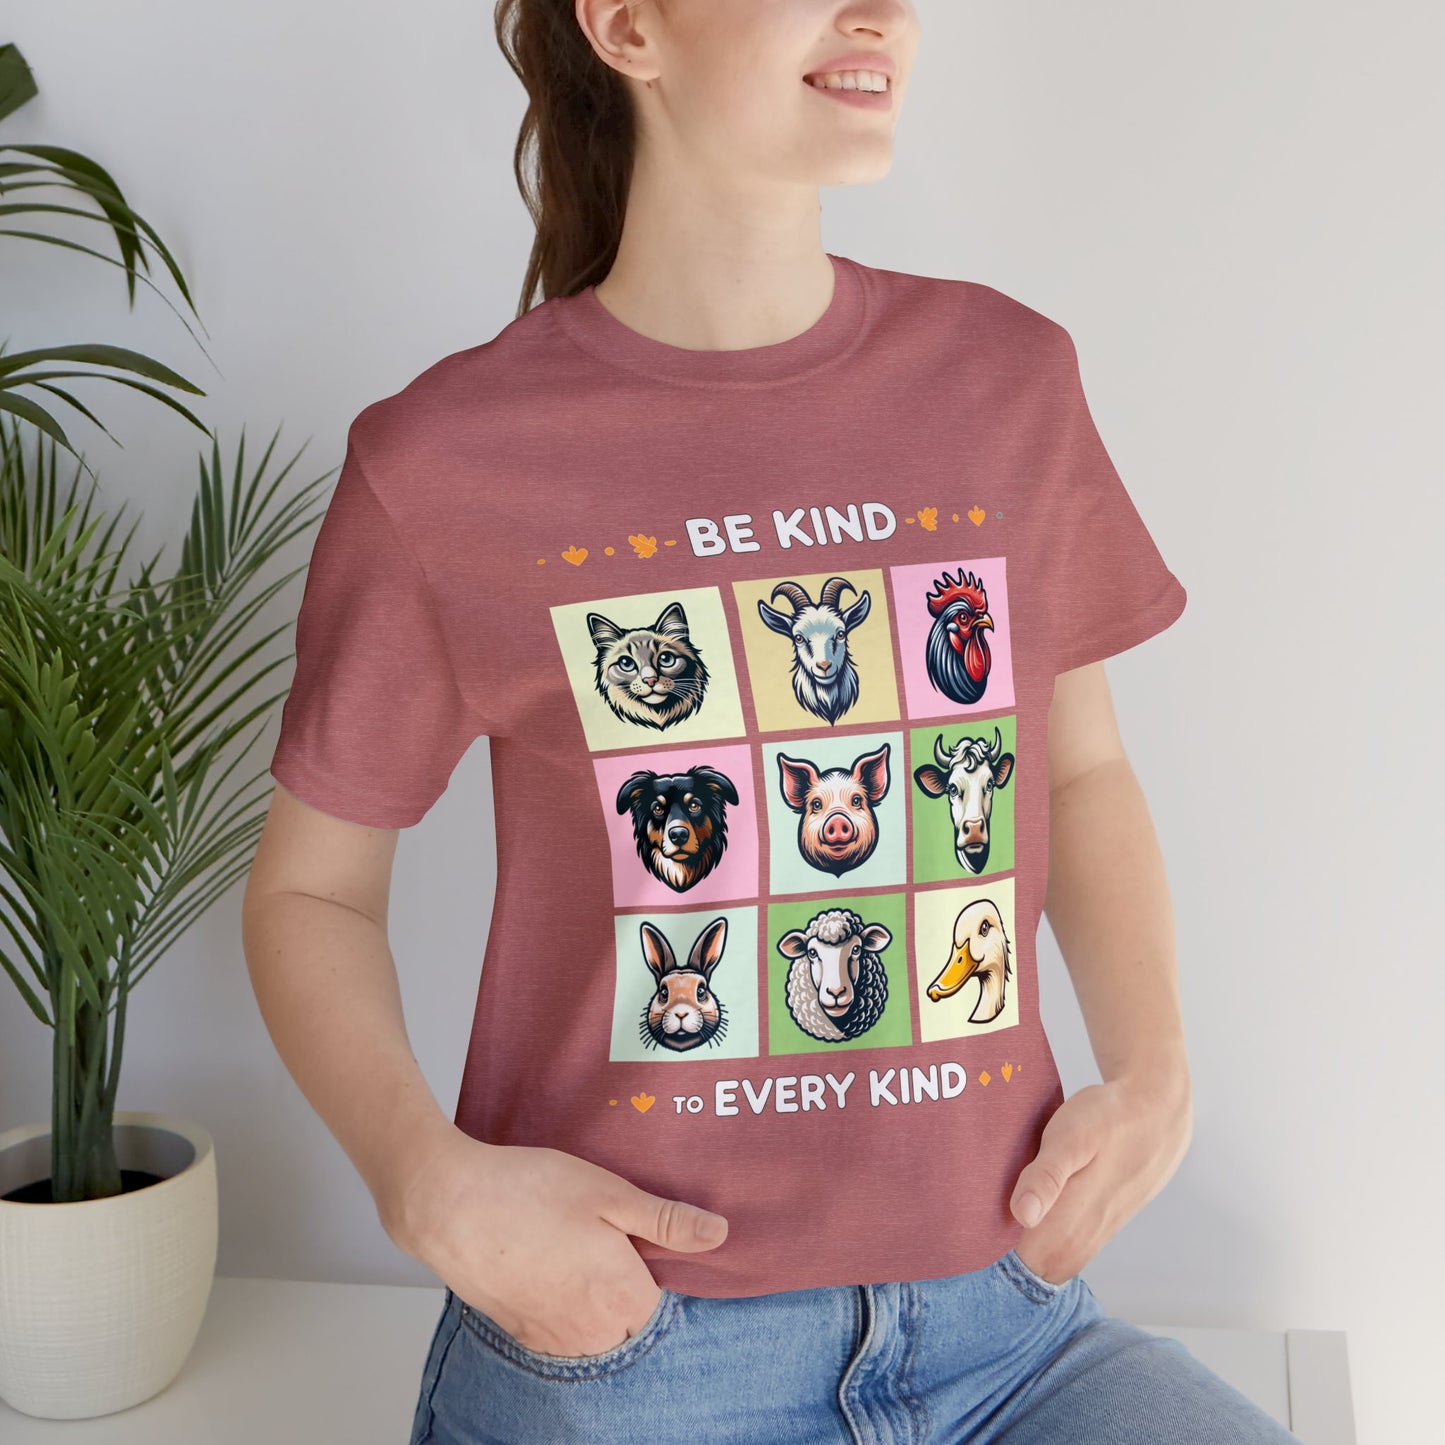 Be Kind to Every Kind - 100% Cotton Unisex T-shirt